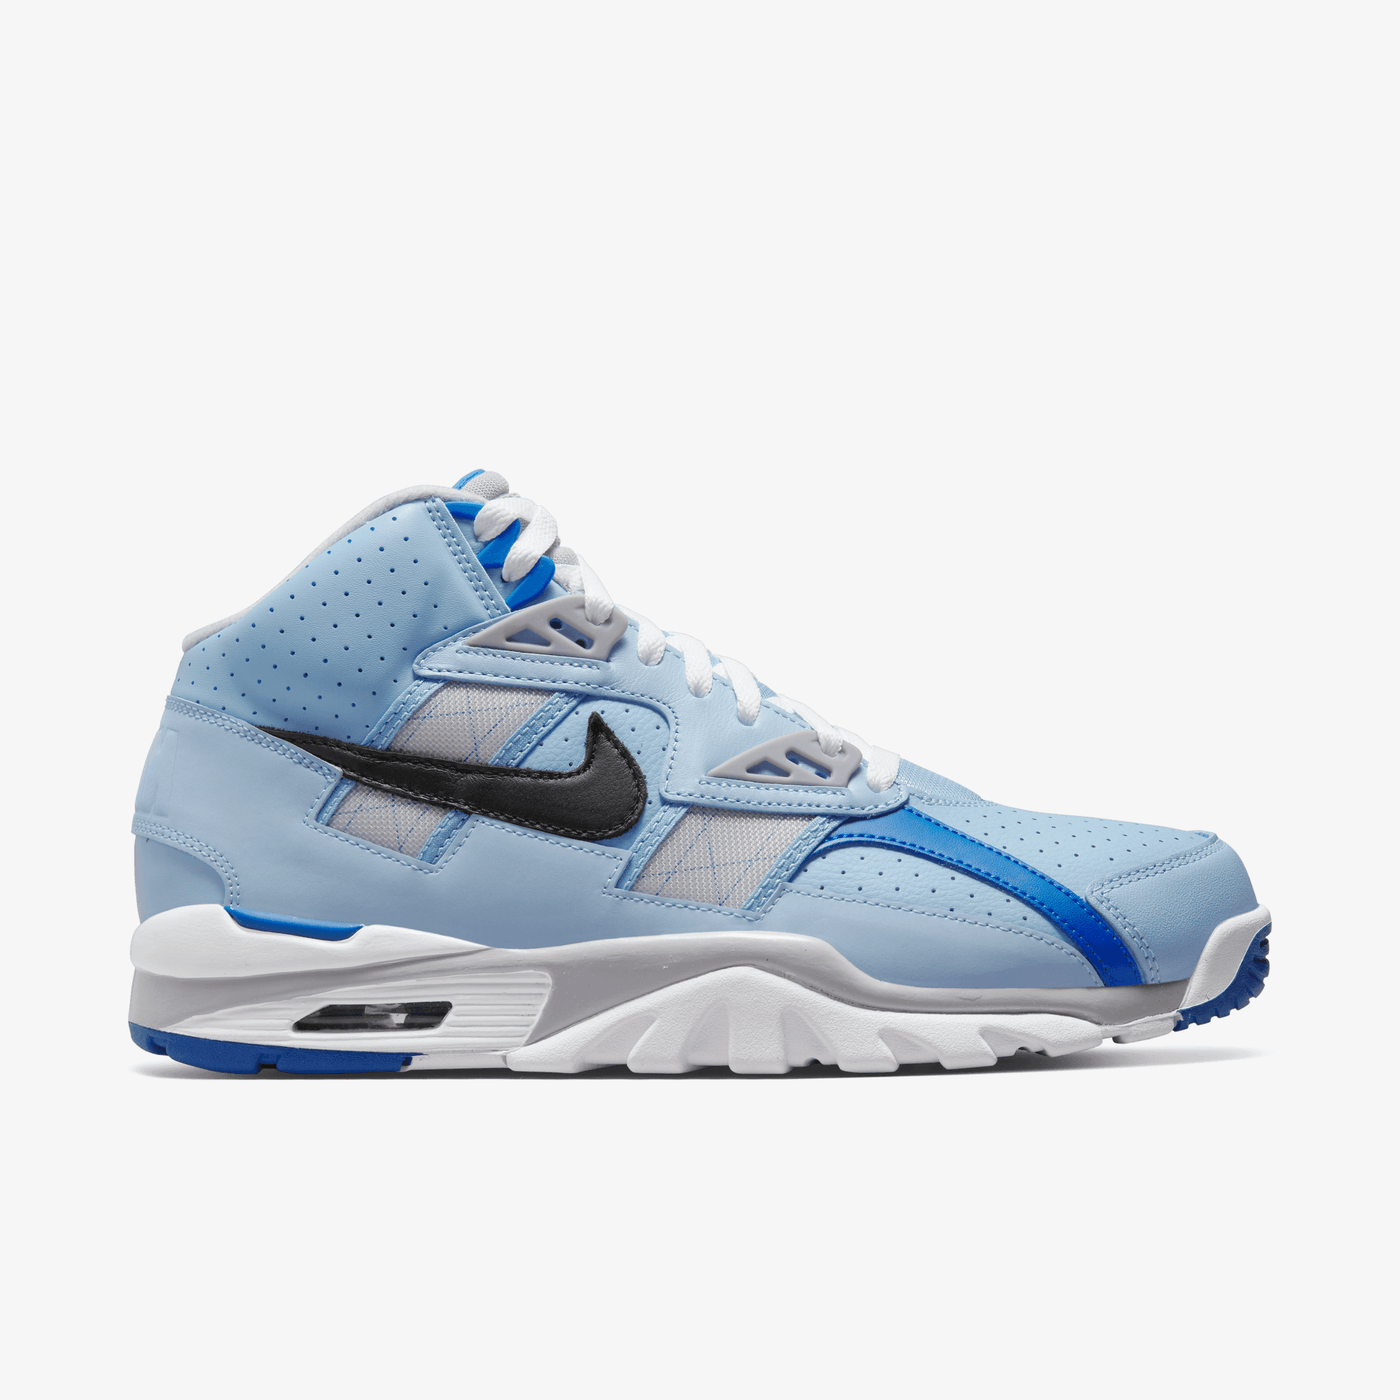 Nike Air Trainer SC High sneakers in blue